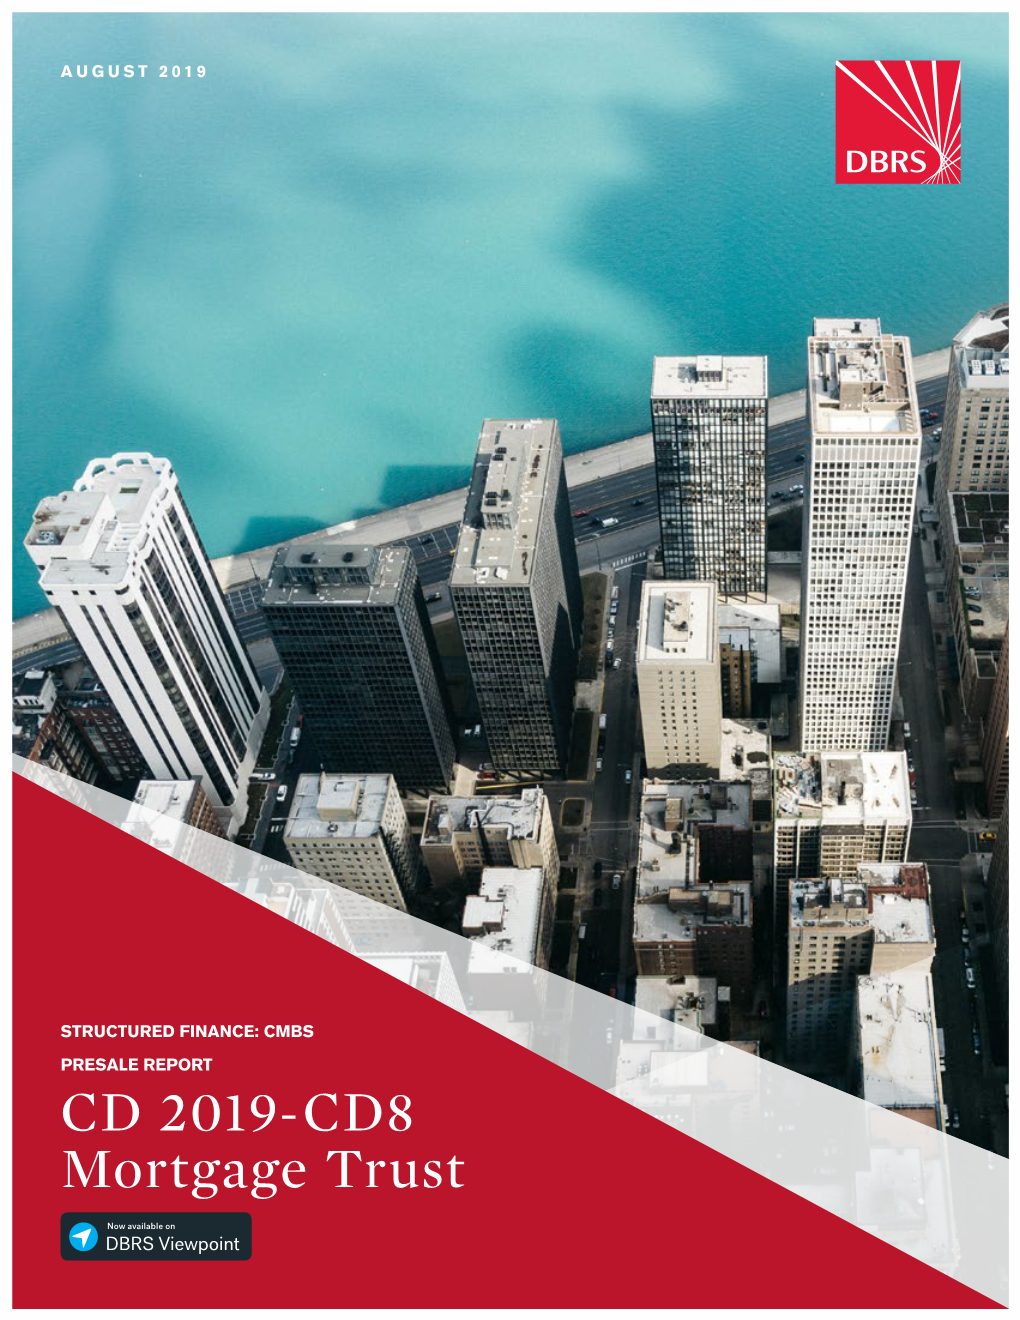 CD 2019-CD8 Mortgage Trust Table of Contents